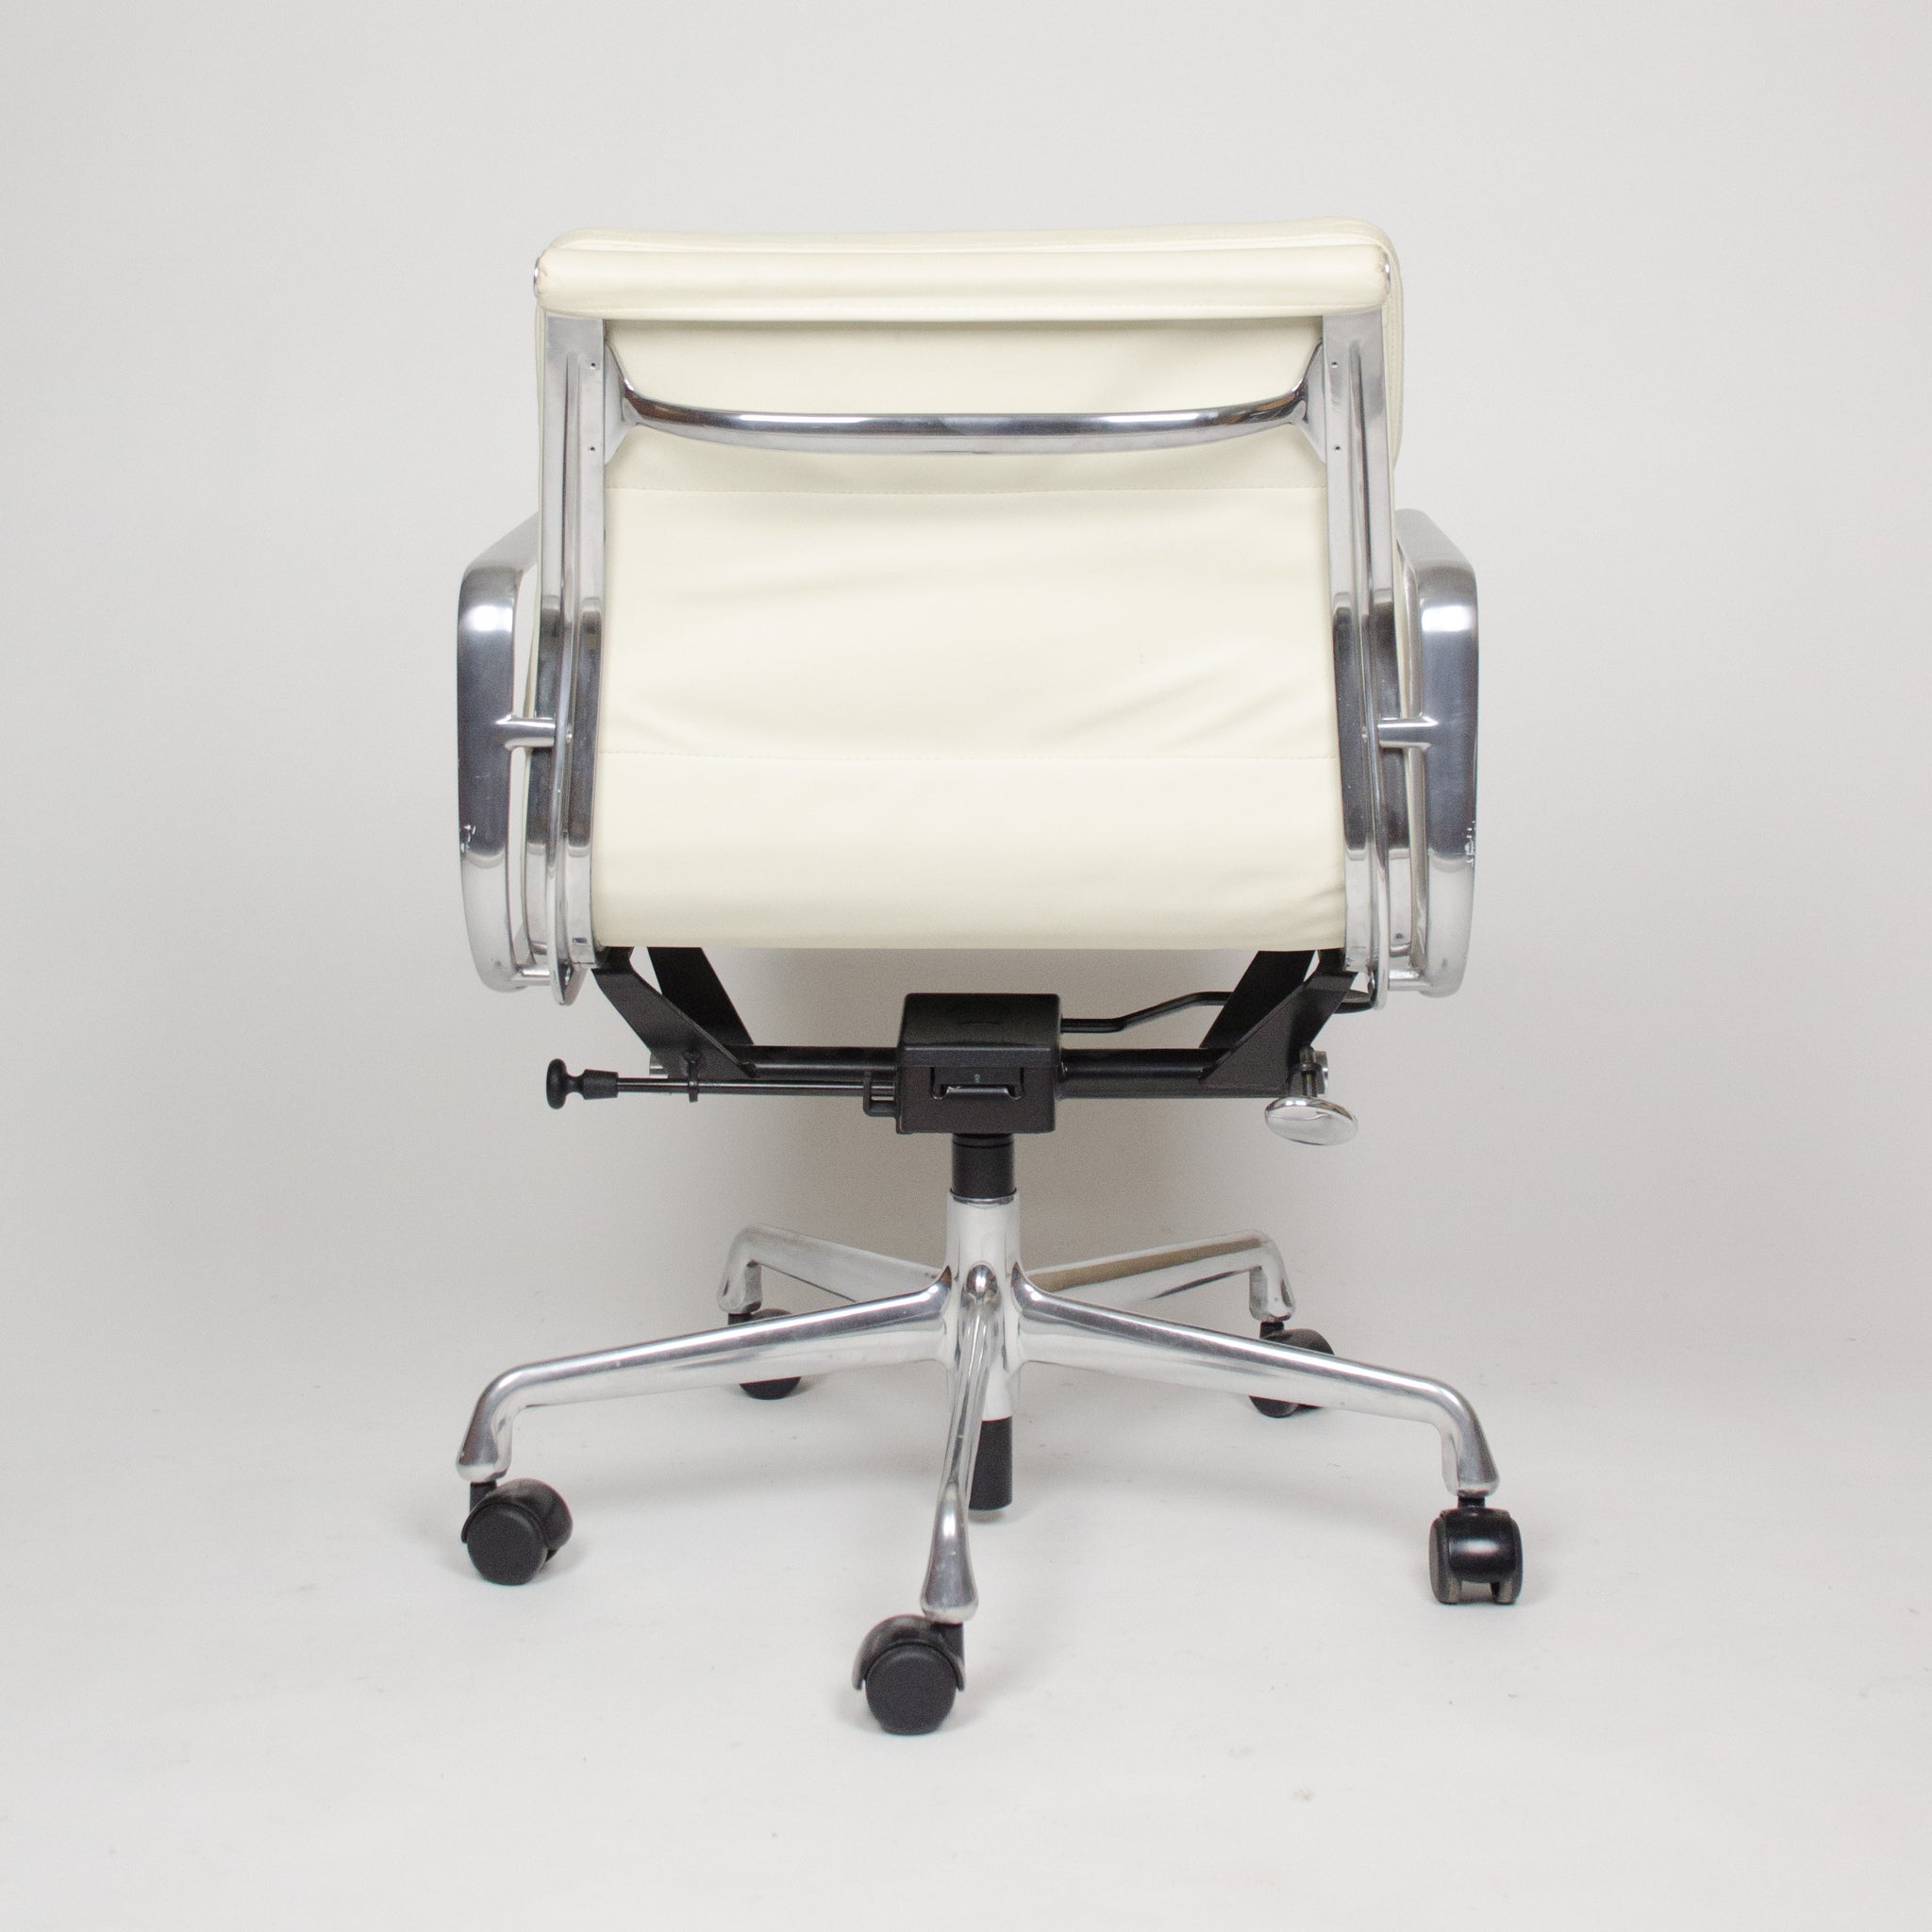 SOLD Eames Herman Miller Soft Pad Aluminum Group Chairs White Leather Mint (2x)